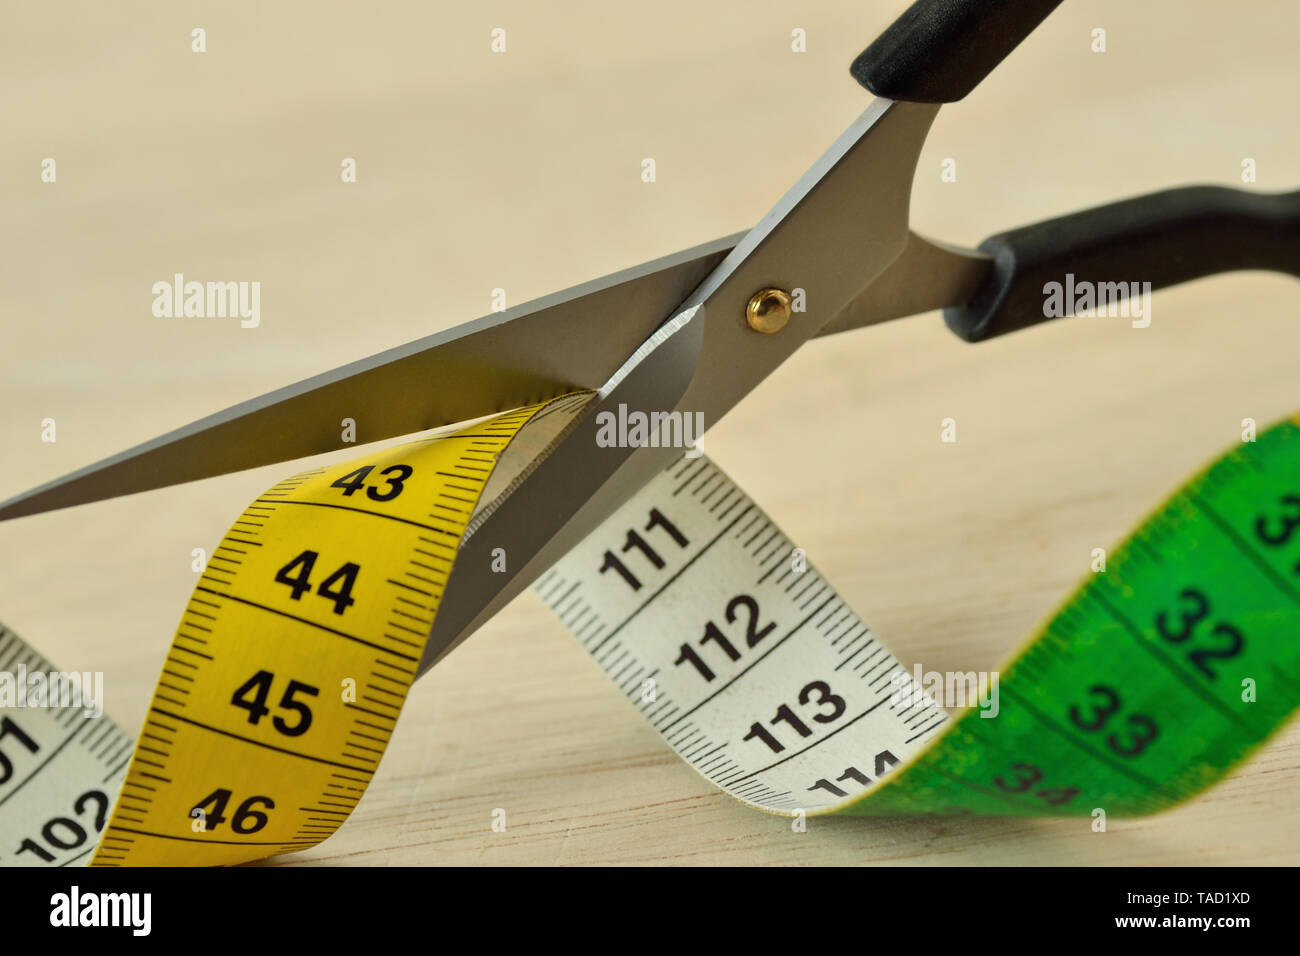 Scissors cutting measuring tape - Concept of dieting and slimming Stock Photo